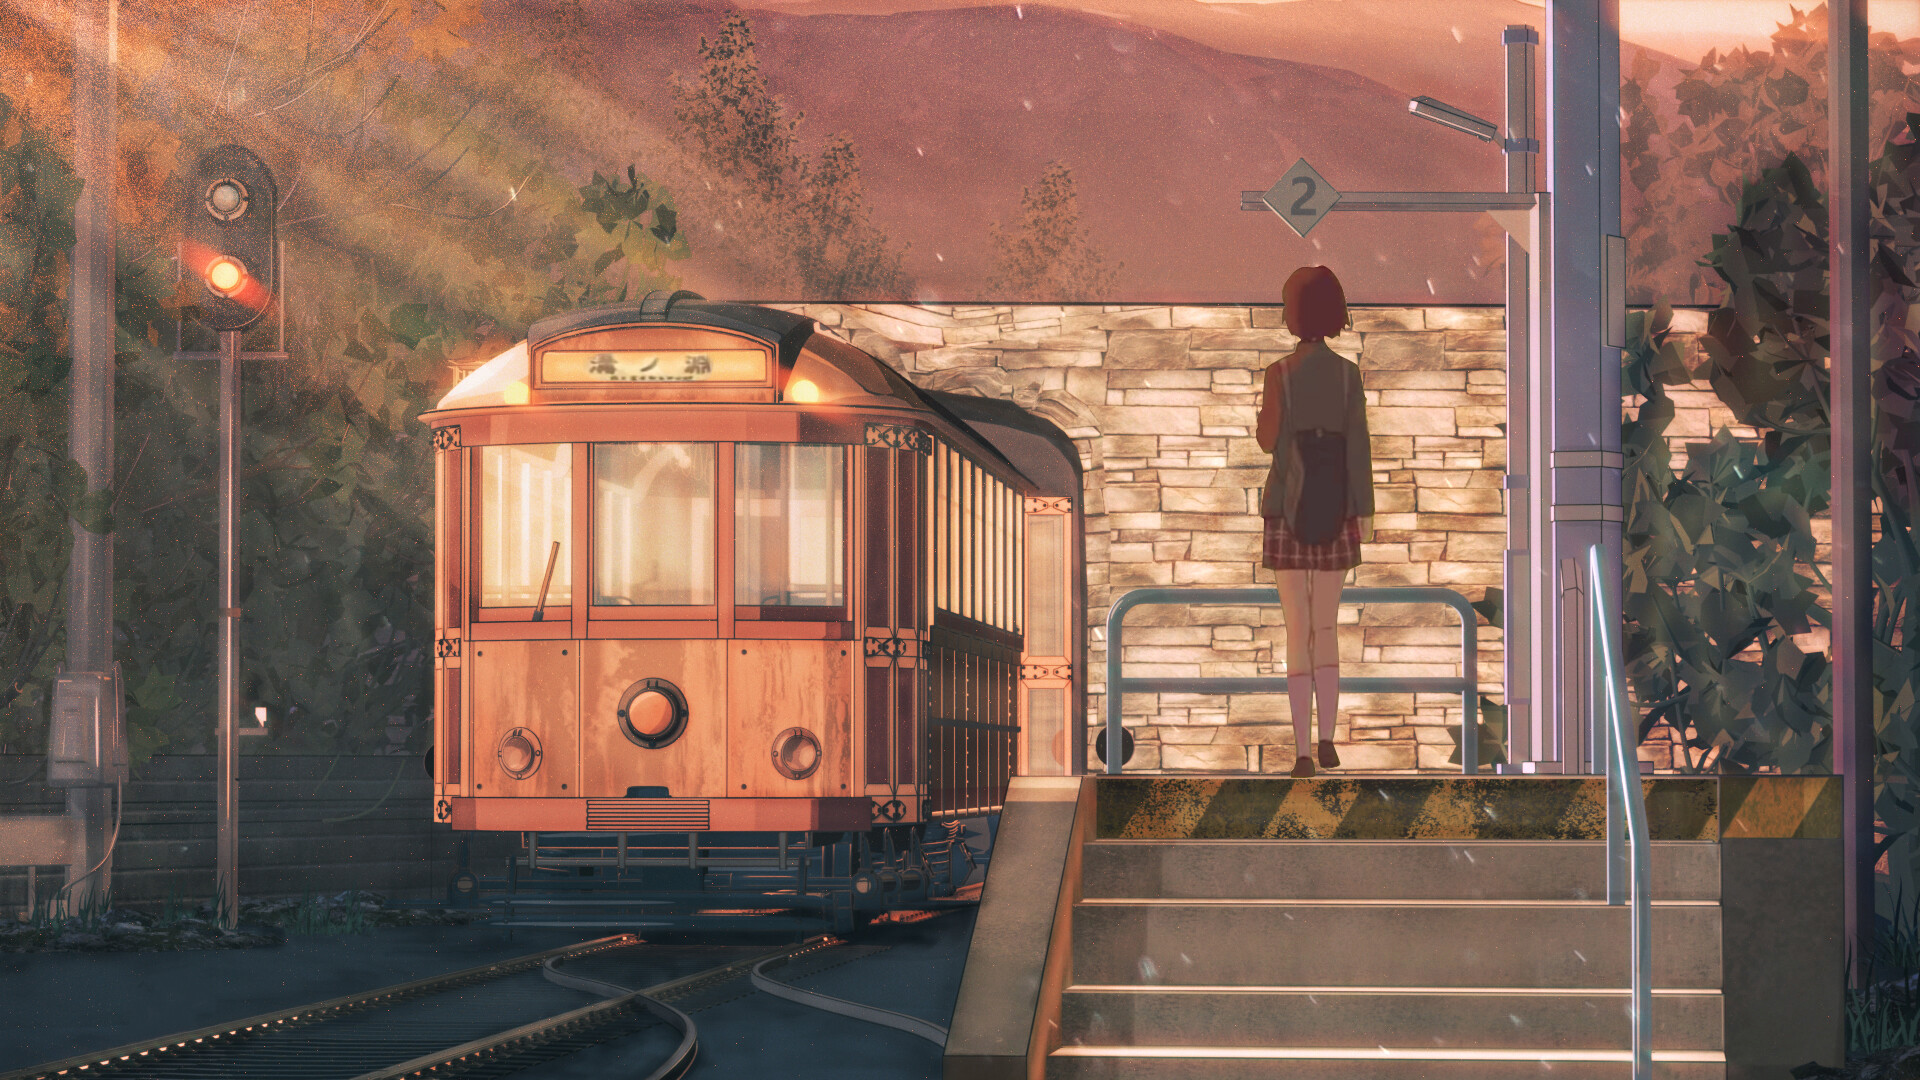 Lofi Train In Nature, Anime Manga Style Illustration Design, Wallpaper  Background Art, Generated By AI Stock Photo, Picture And Royalty Free  Image. Image 206288805.